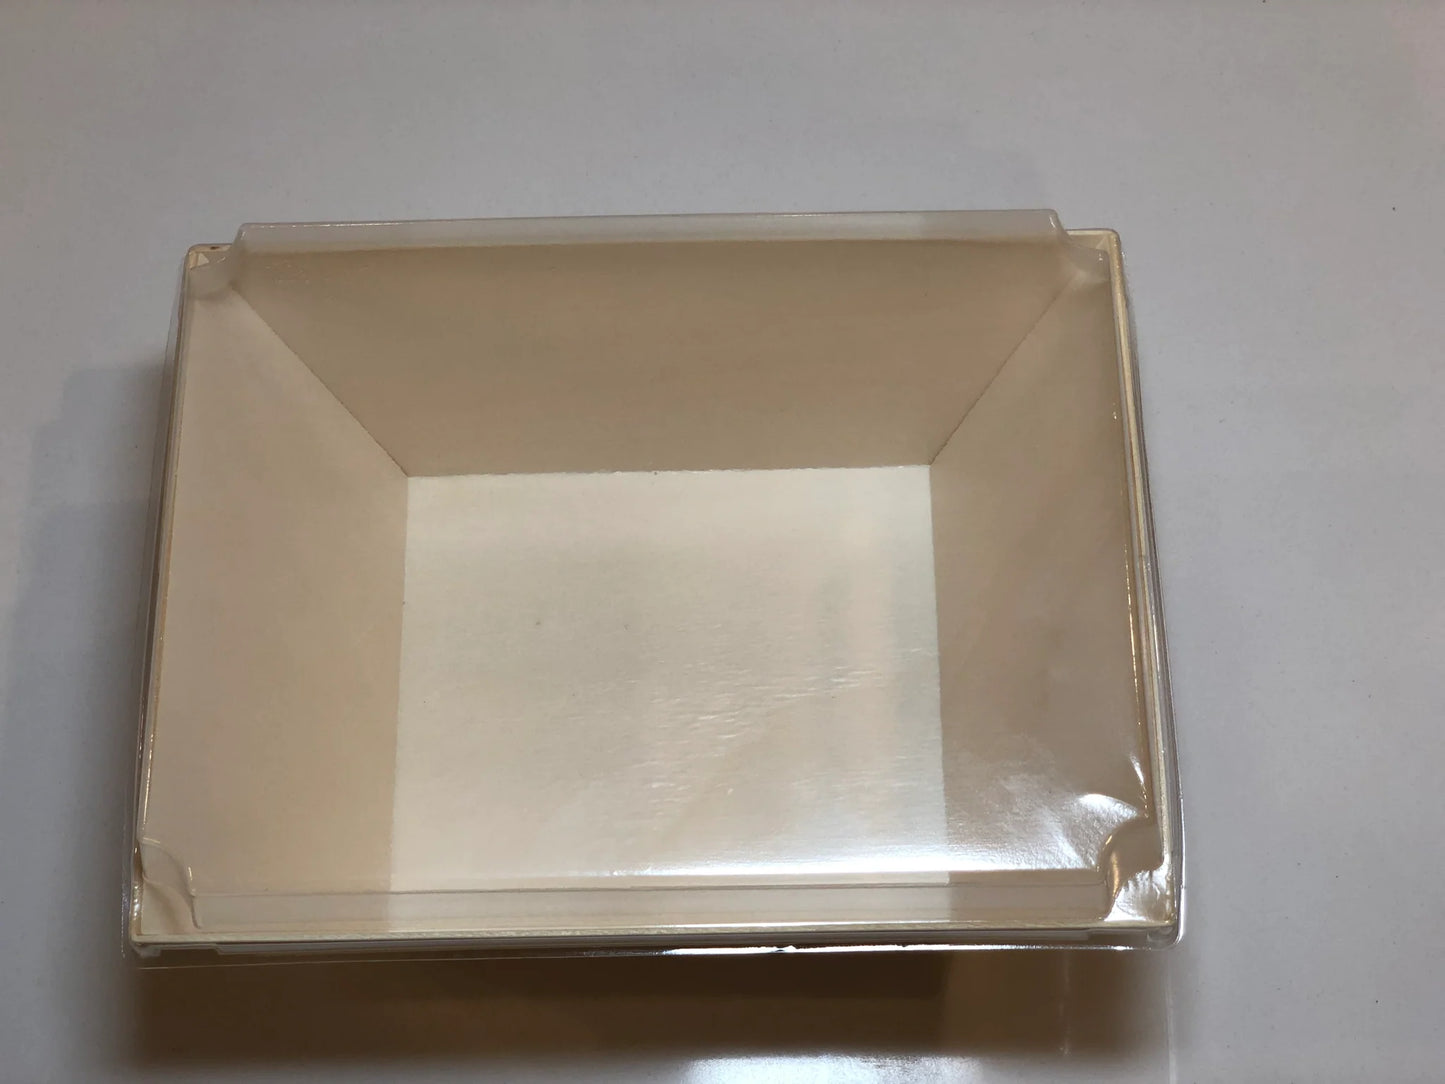 6" X 8" X 3" Covered Tray Set | Compostable Balsa Tray with RPET Lid | 100 of each